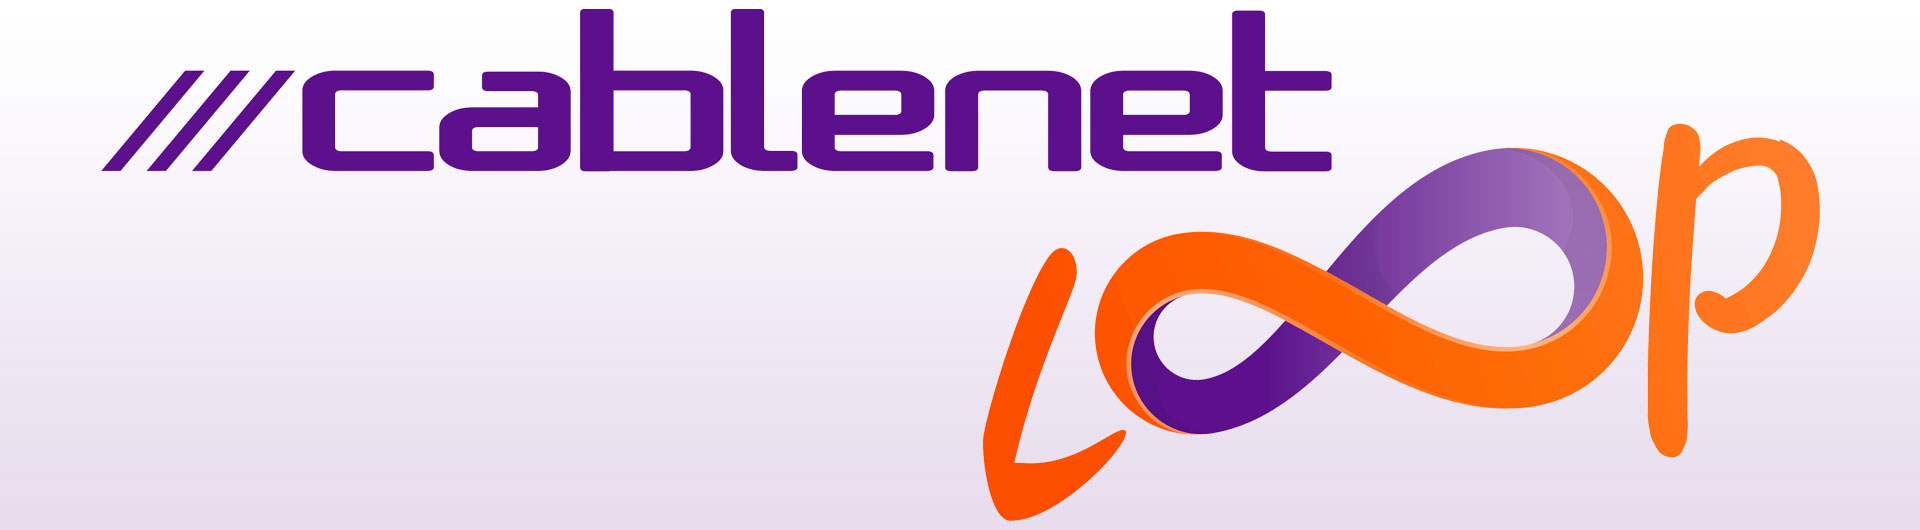 CABLENET